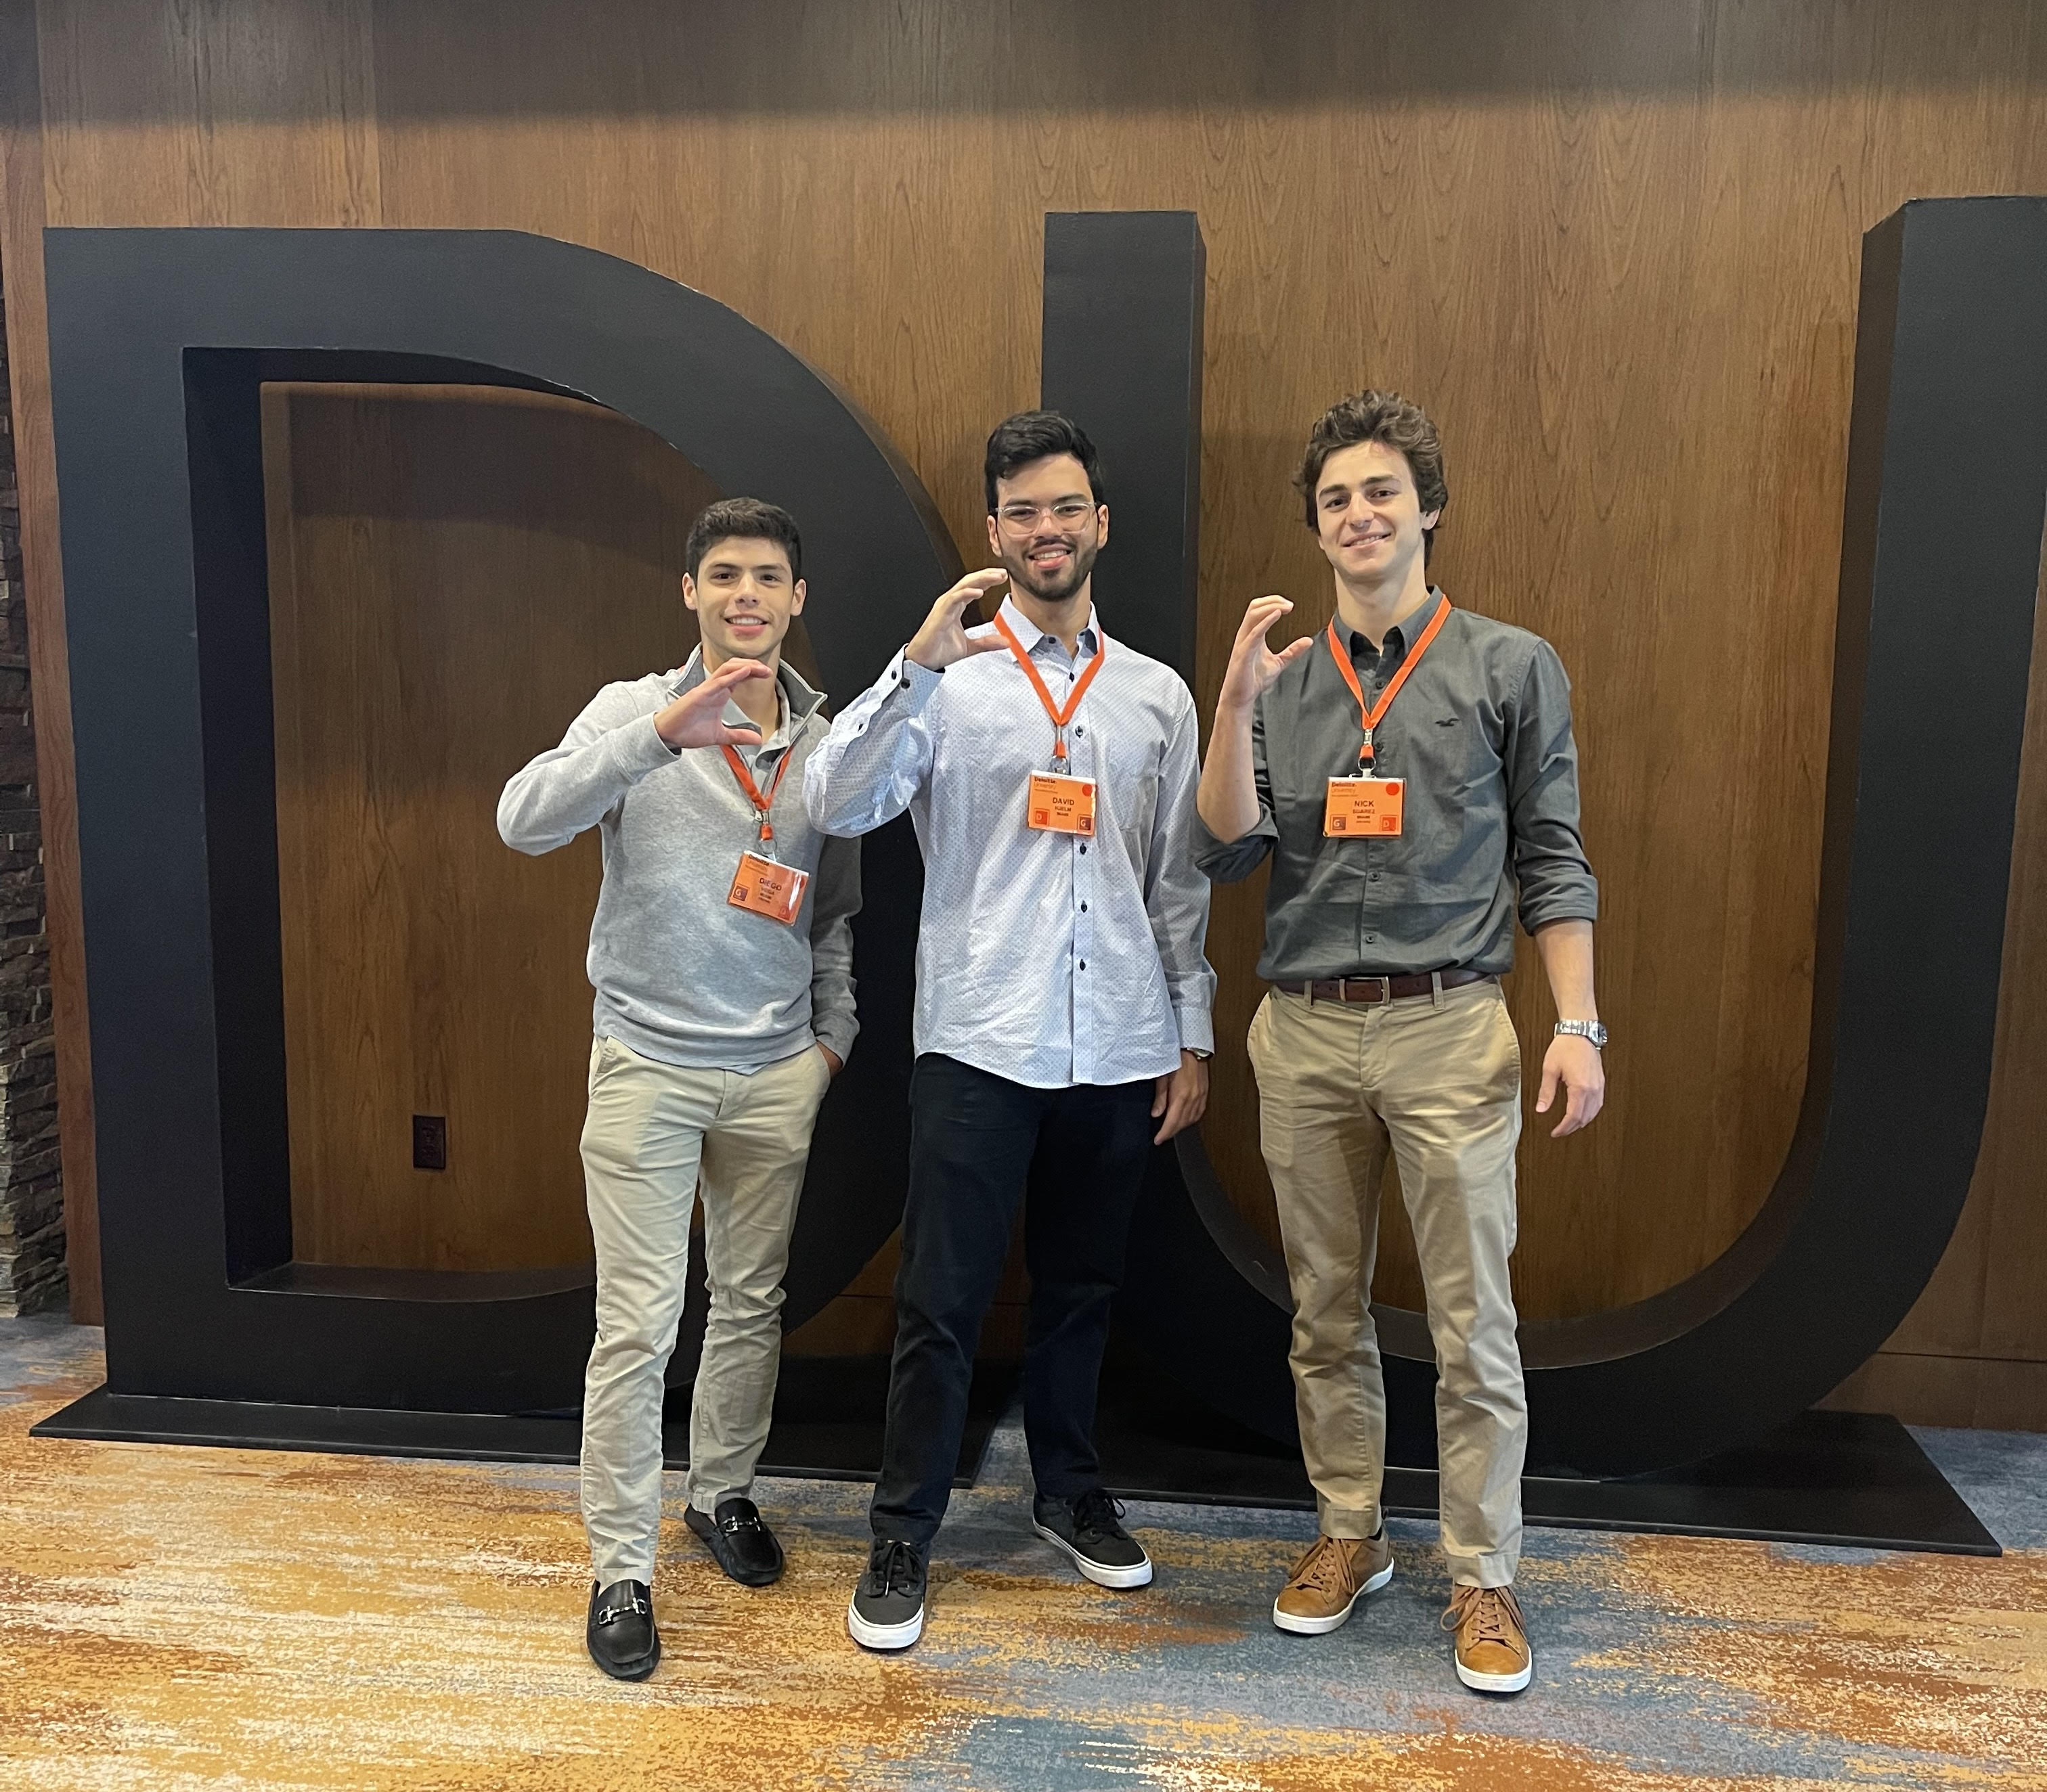 Conform Walter Cunningham meditativ Columbus High School on Twitter: "Diego Vega '19, David Hjelm '19, and Nick  Suarez '19 showing their #CPride while at Deloitte's National Leadership  Conference at Deloitte University in Dallas, Texas. #Adelante  https://t.co/Vvv2TMzOvX" /